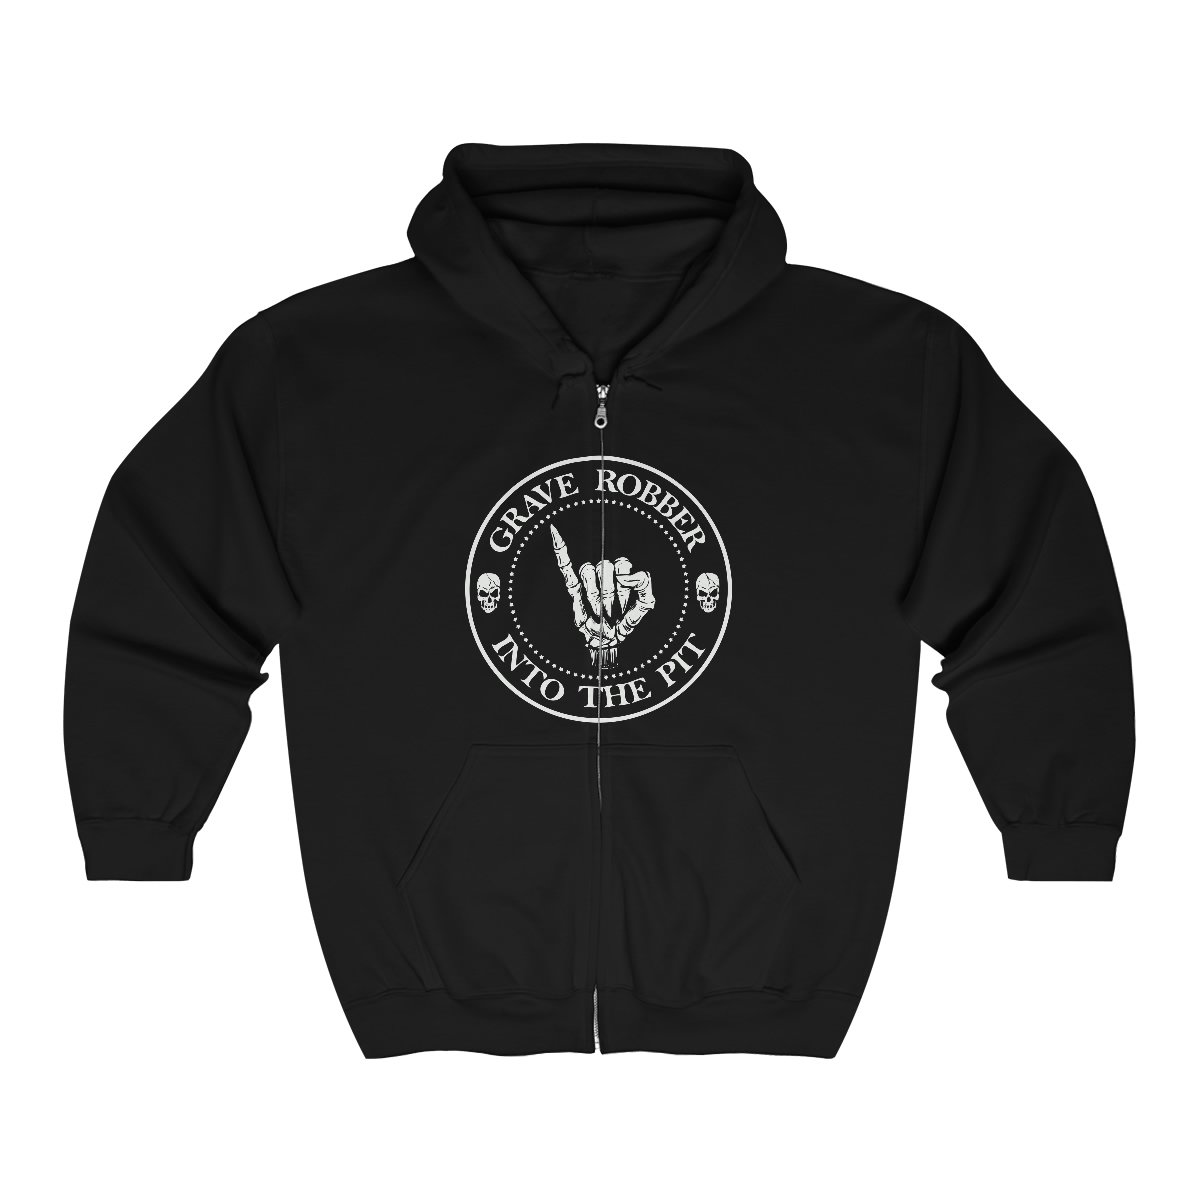 Grave Robber Into The Pit Full Zip Hooded Sweatshirt